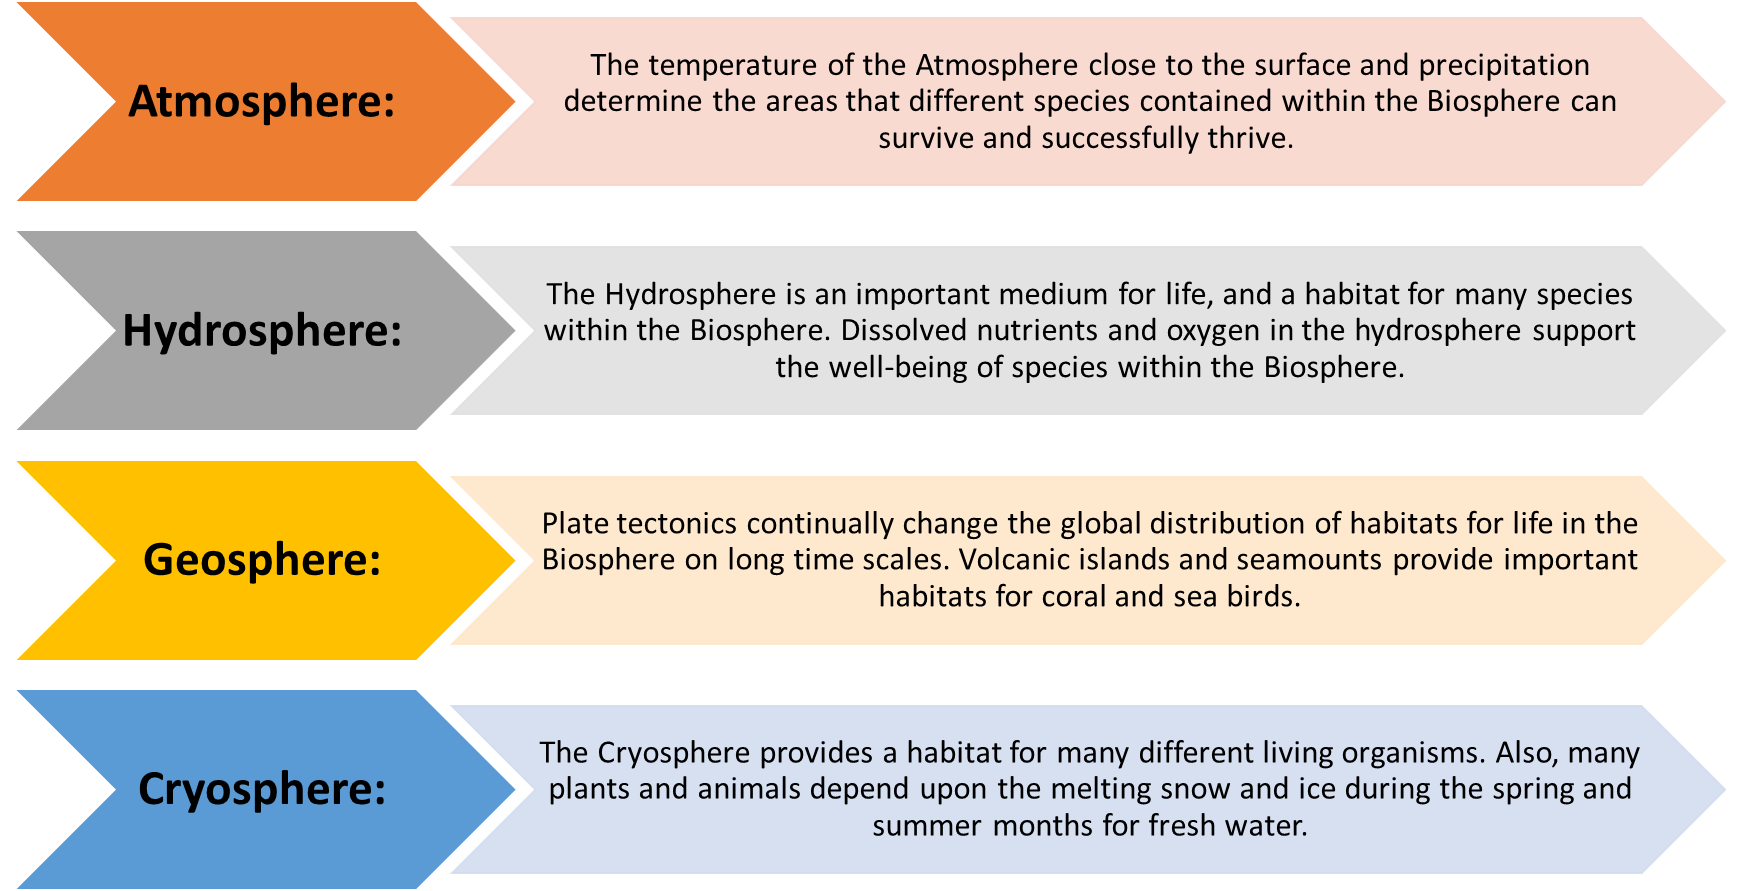 Links between other Spheres and the Biosphere